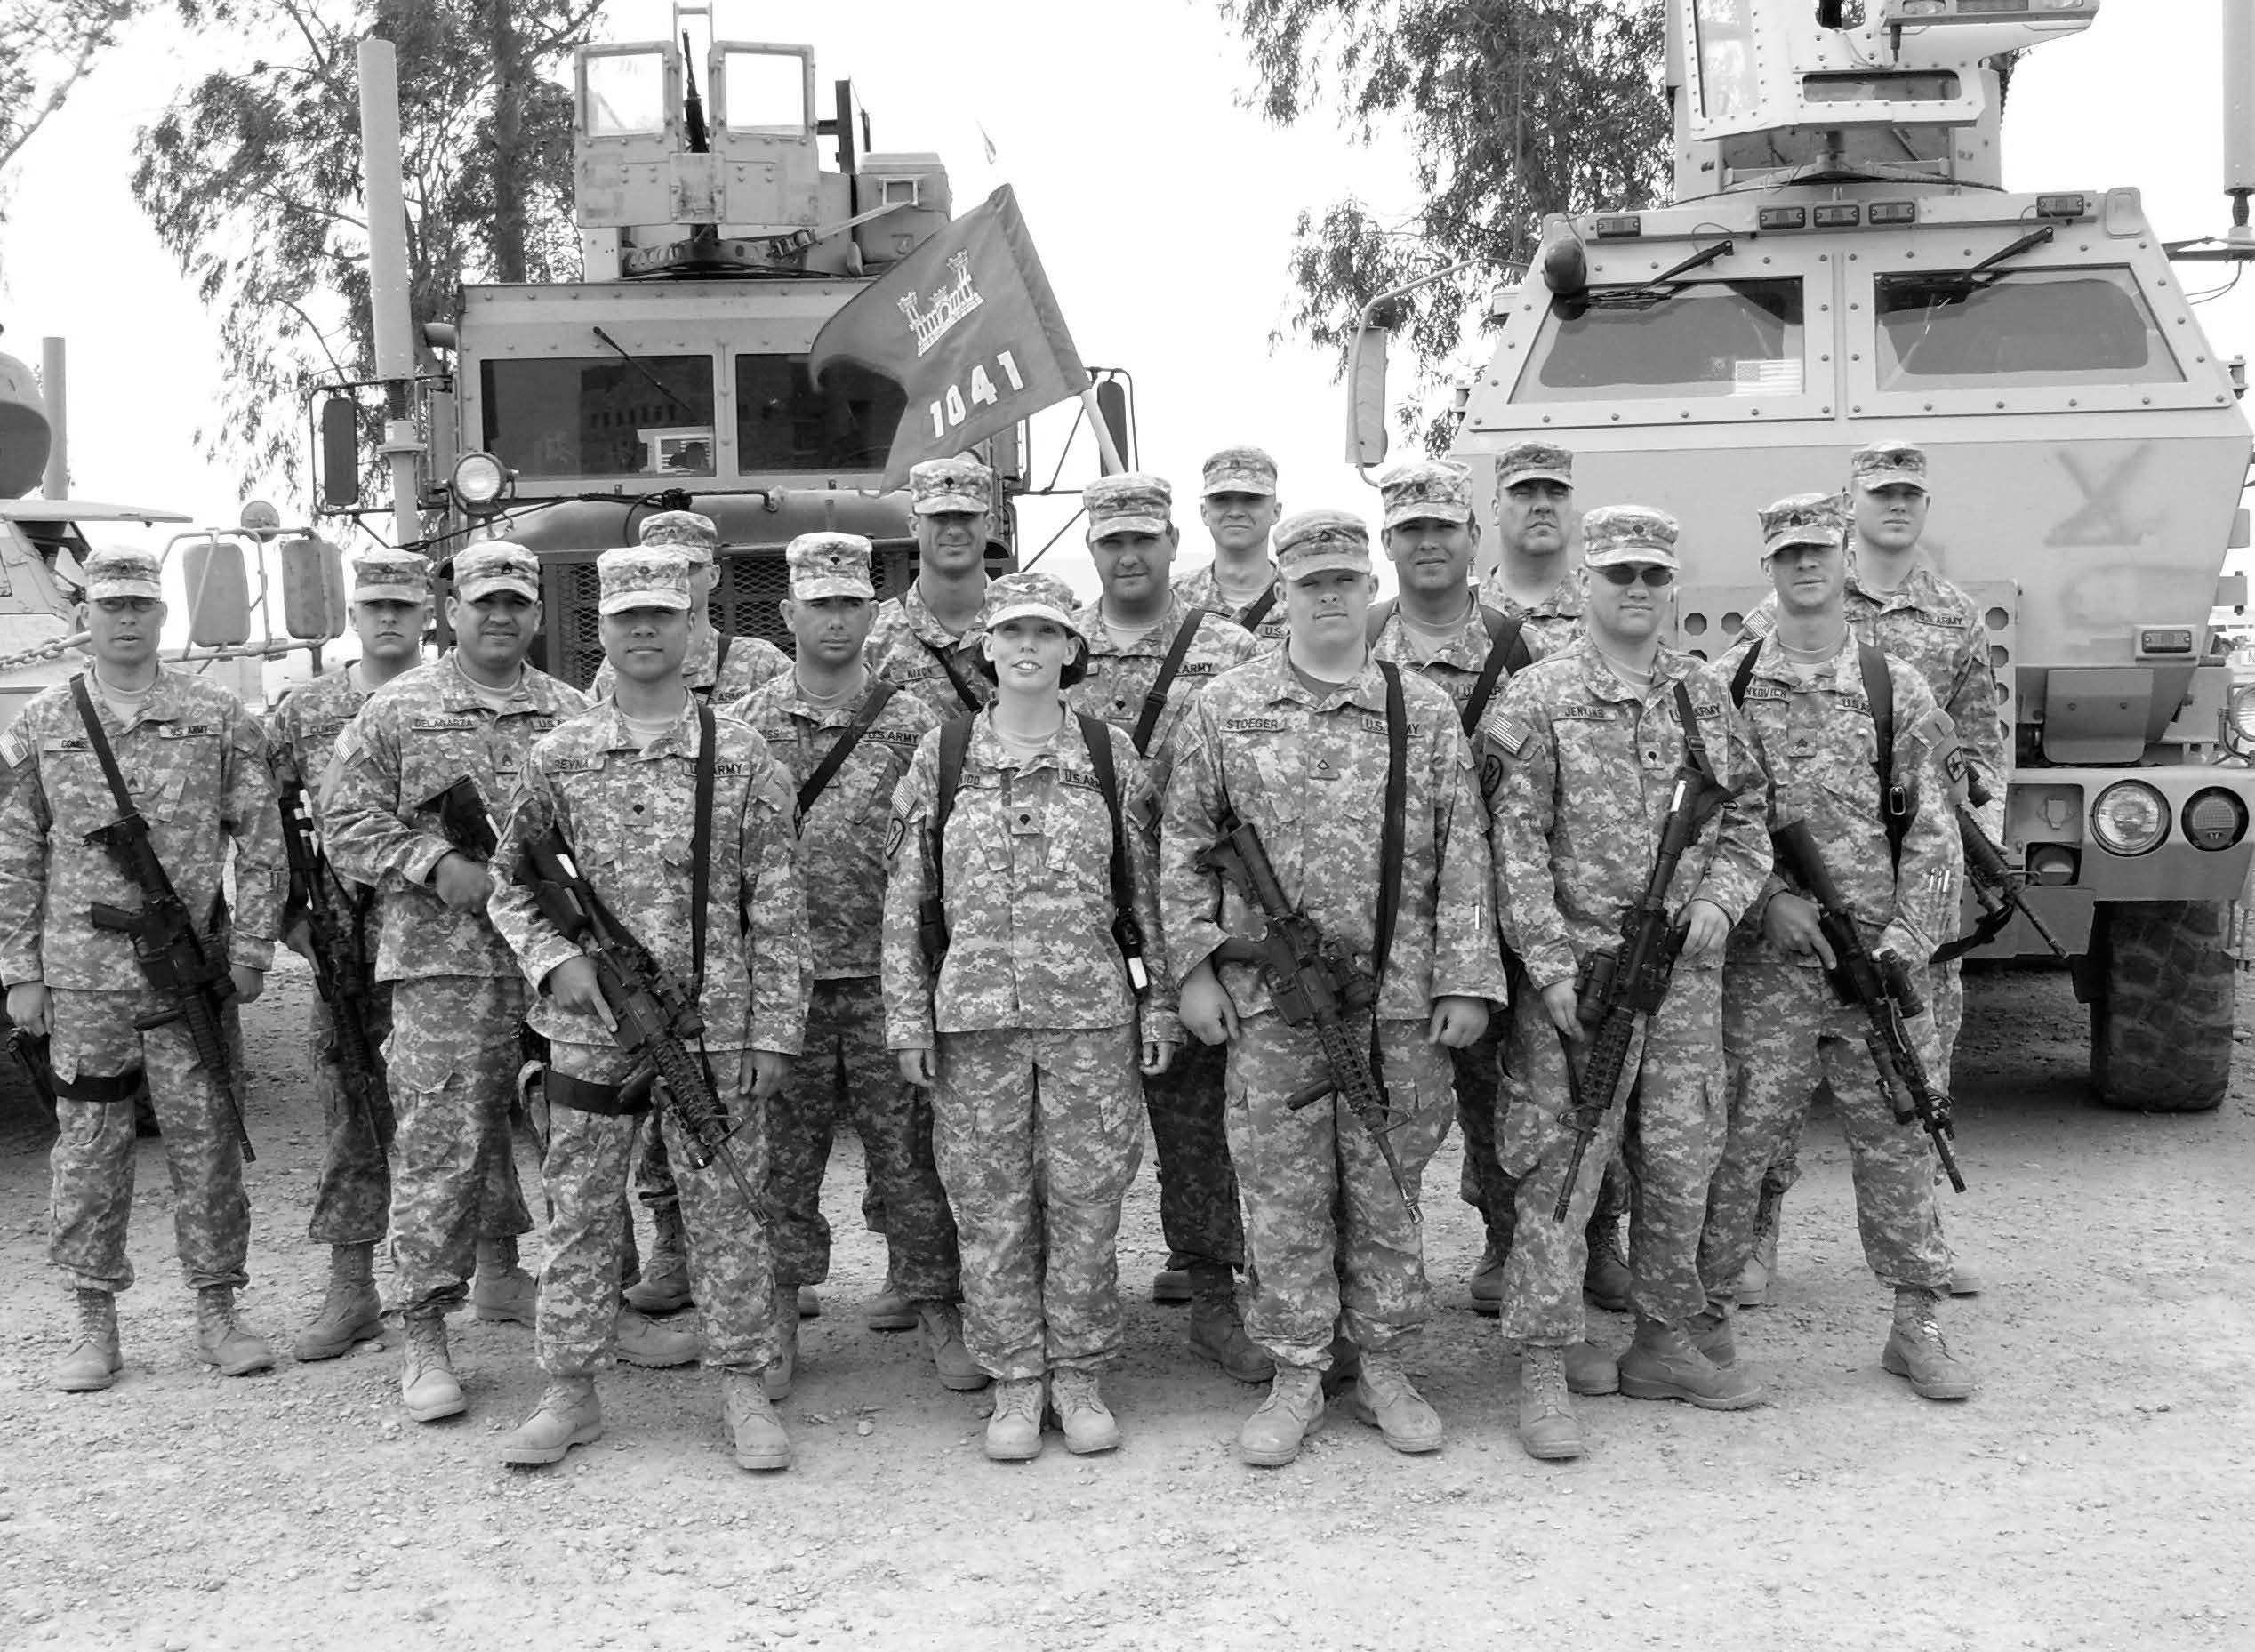 Specialist Bernt Jenkins (third from right) is pictured on April 14, 2007, with members of his squad from the 1041st Engineering Company. Courtesy of Bernt Jenkins.